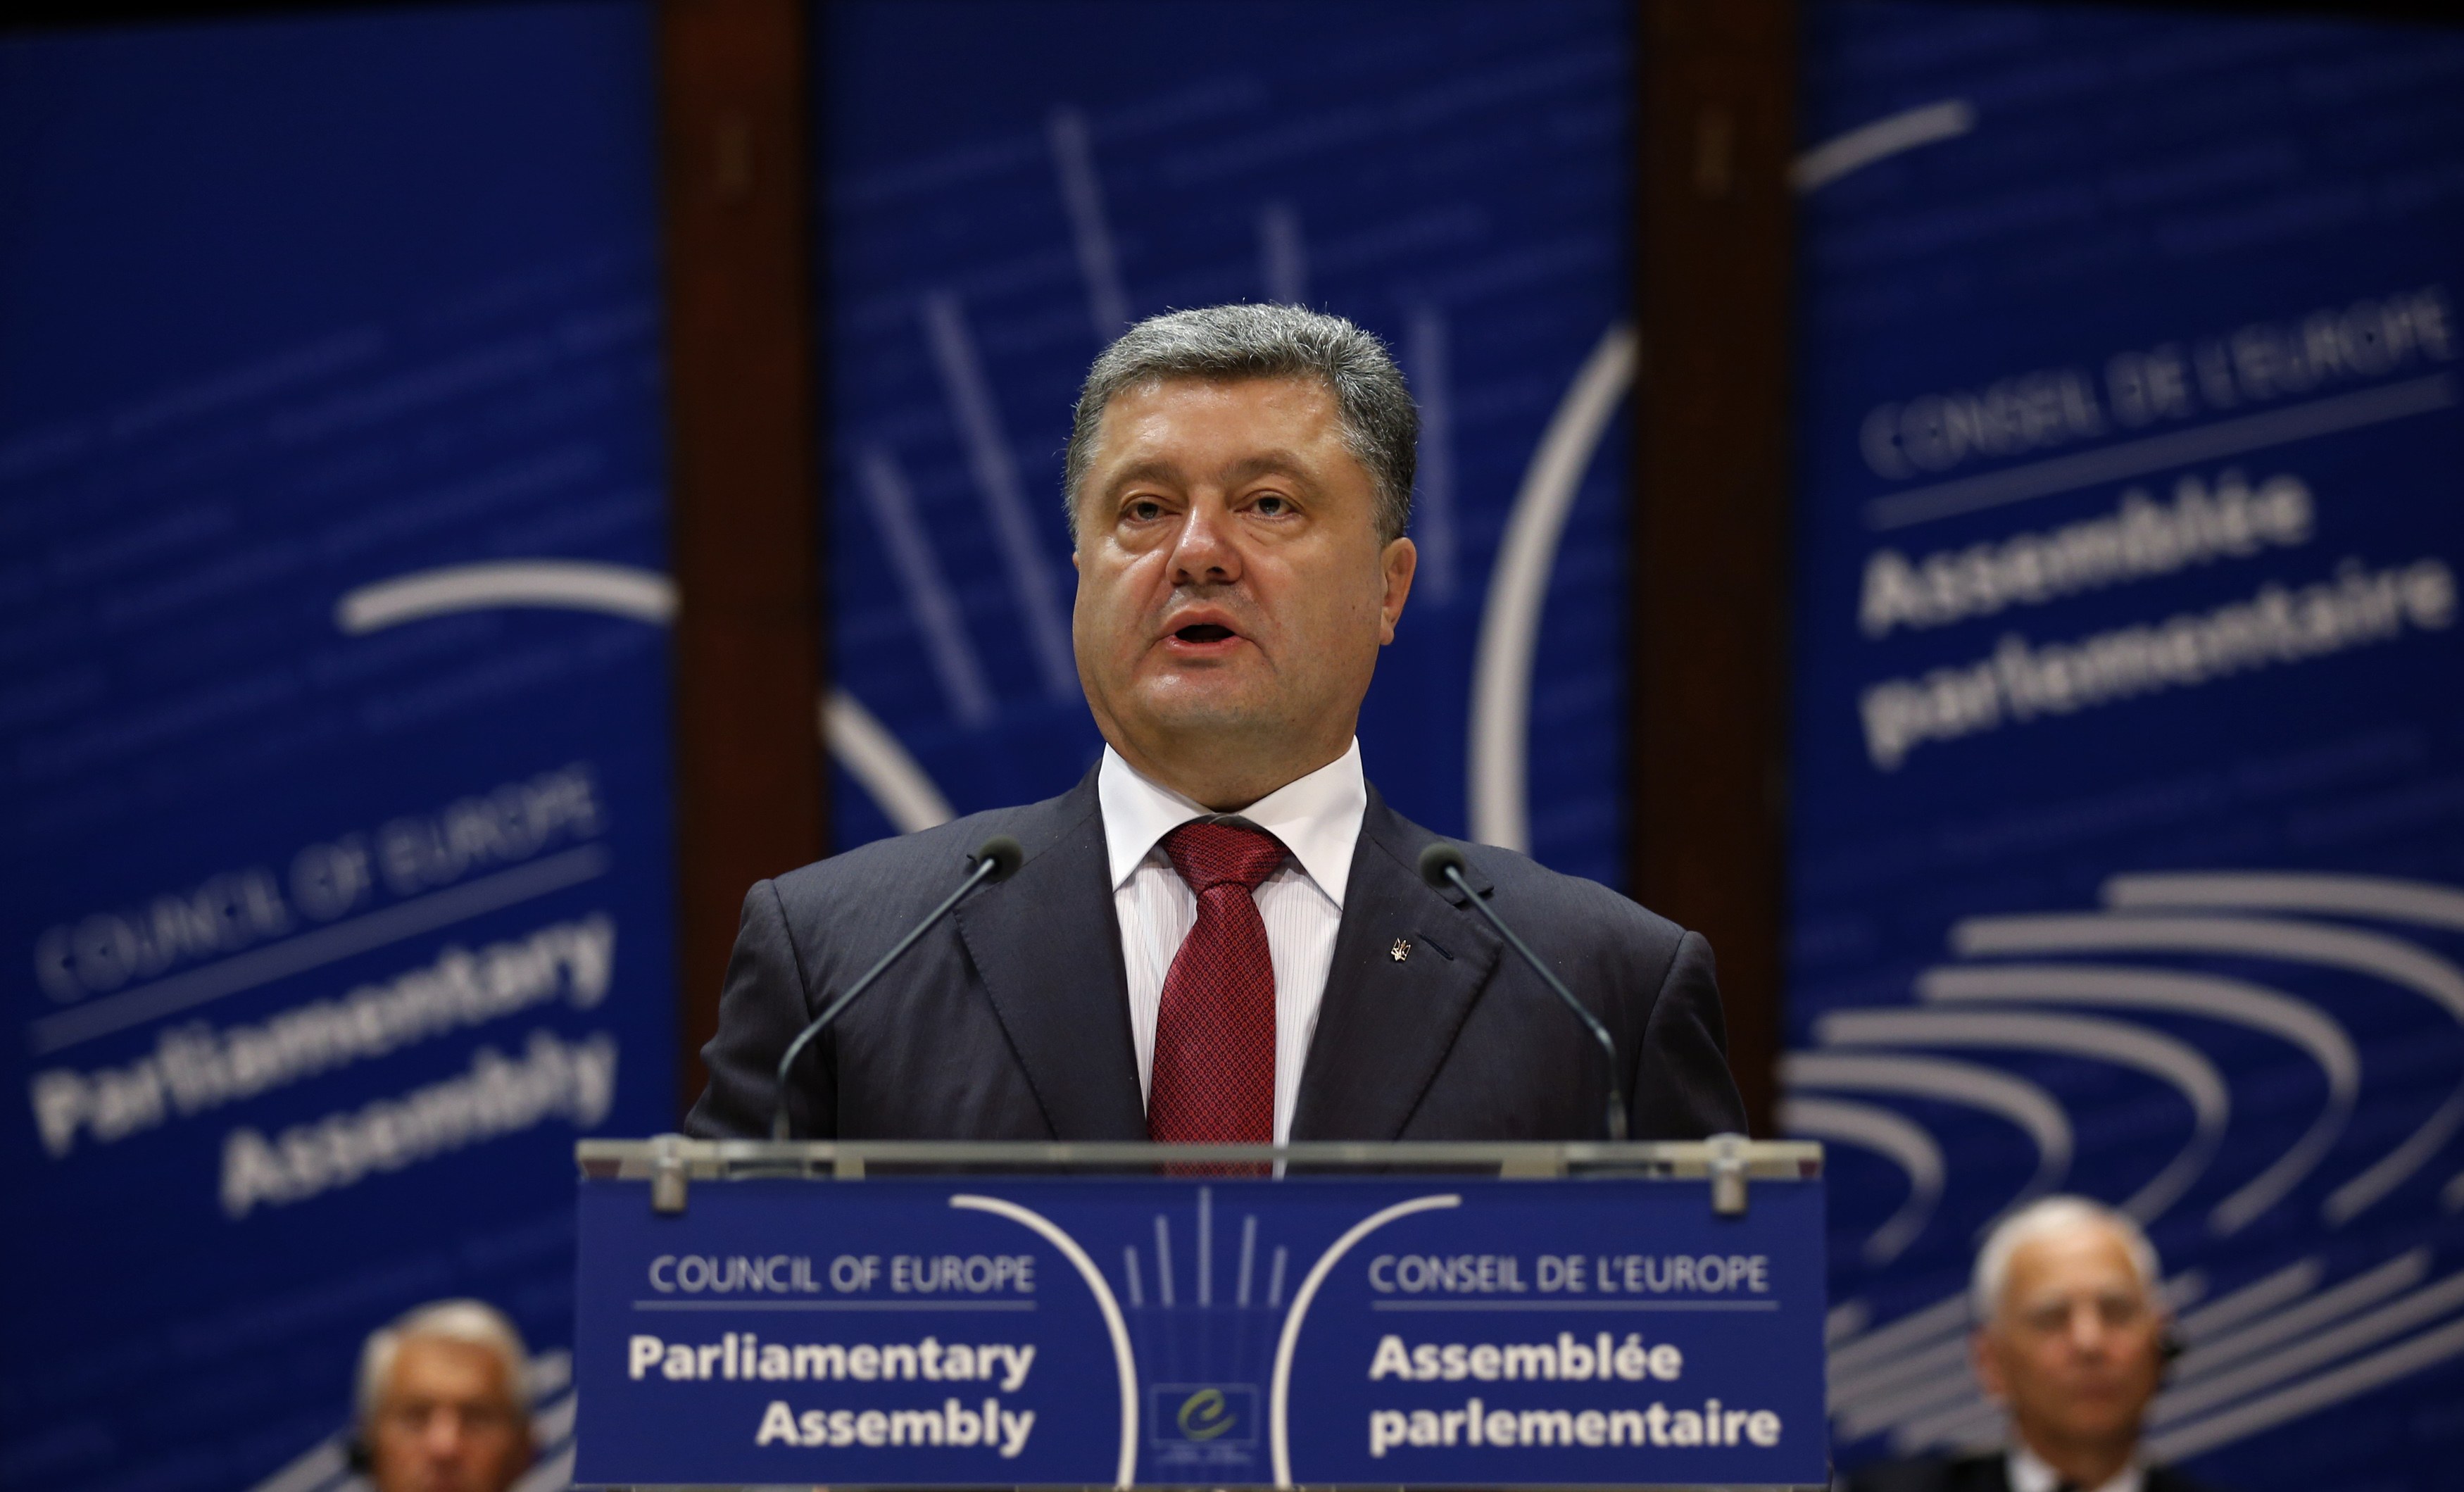 Ukraine leader says he is 'ready' for peace deal with Russia